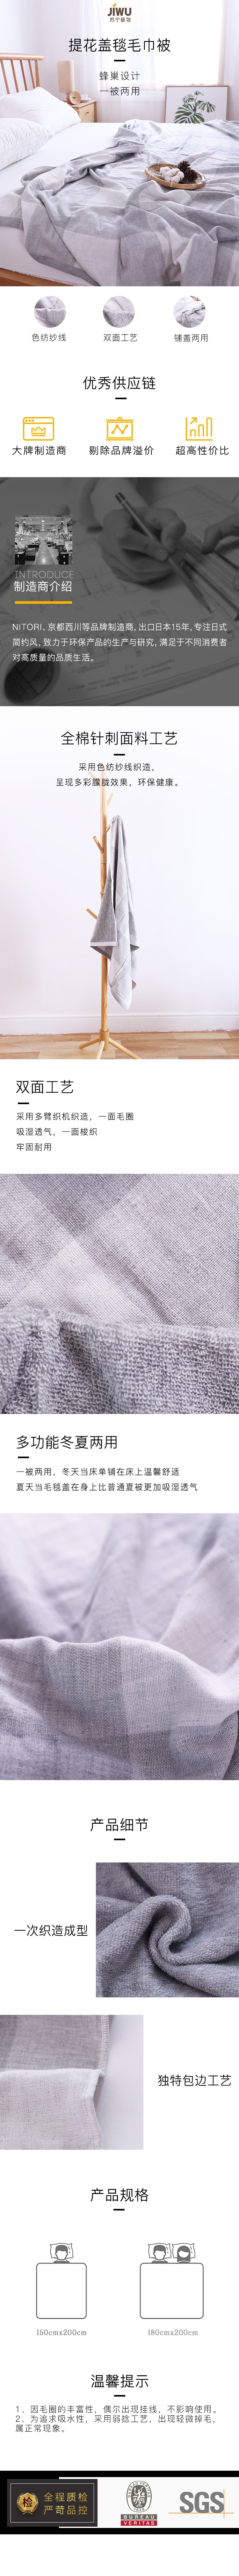 Double Sided Cotton Throw Blanket Grey Size 180*200cm